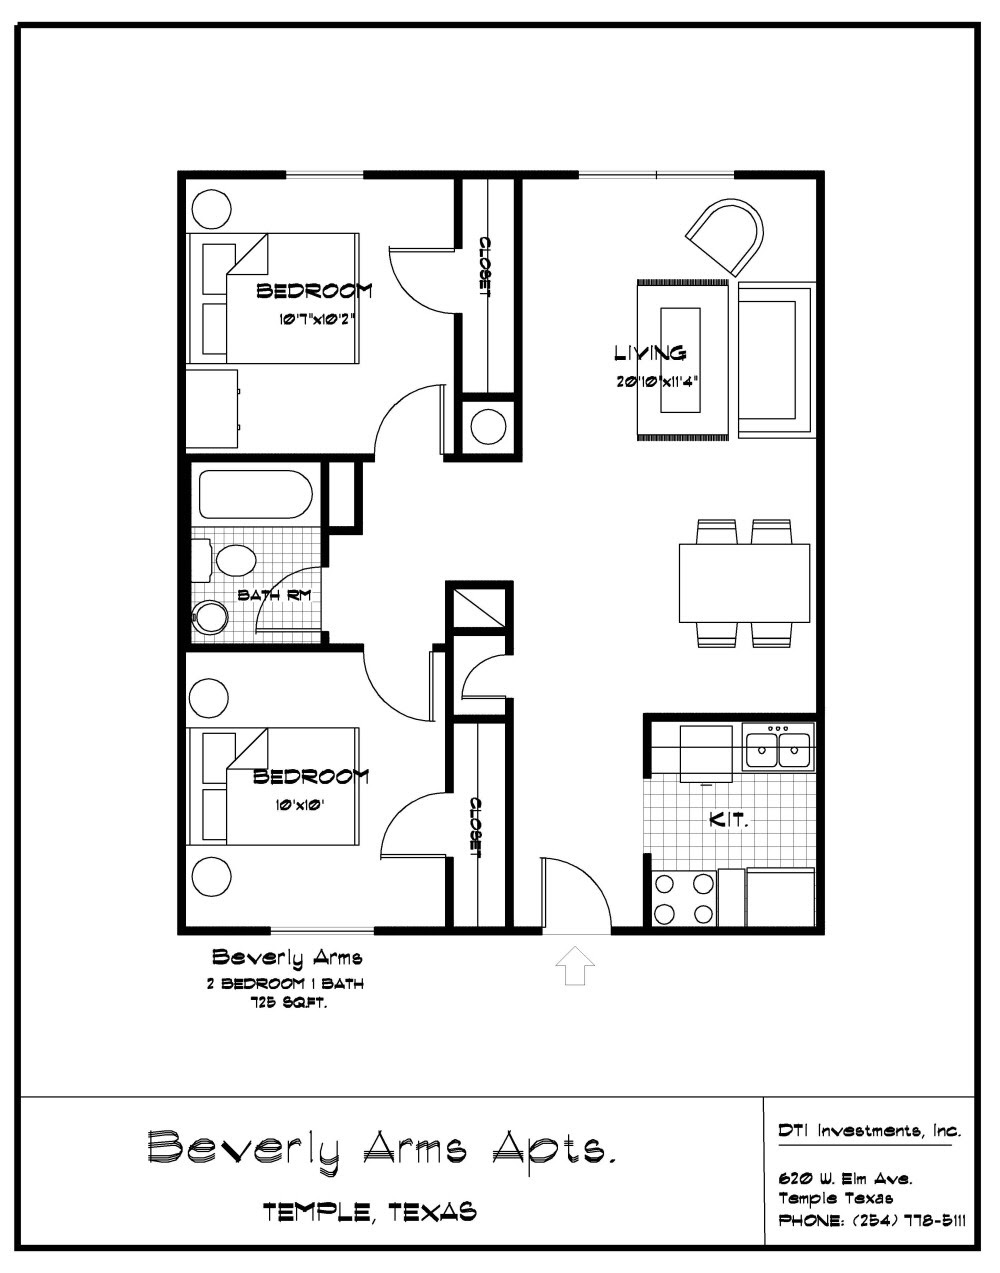 2 Bedroom 1 Bath Layout Search Your Favorite Image